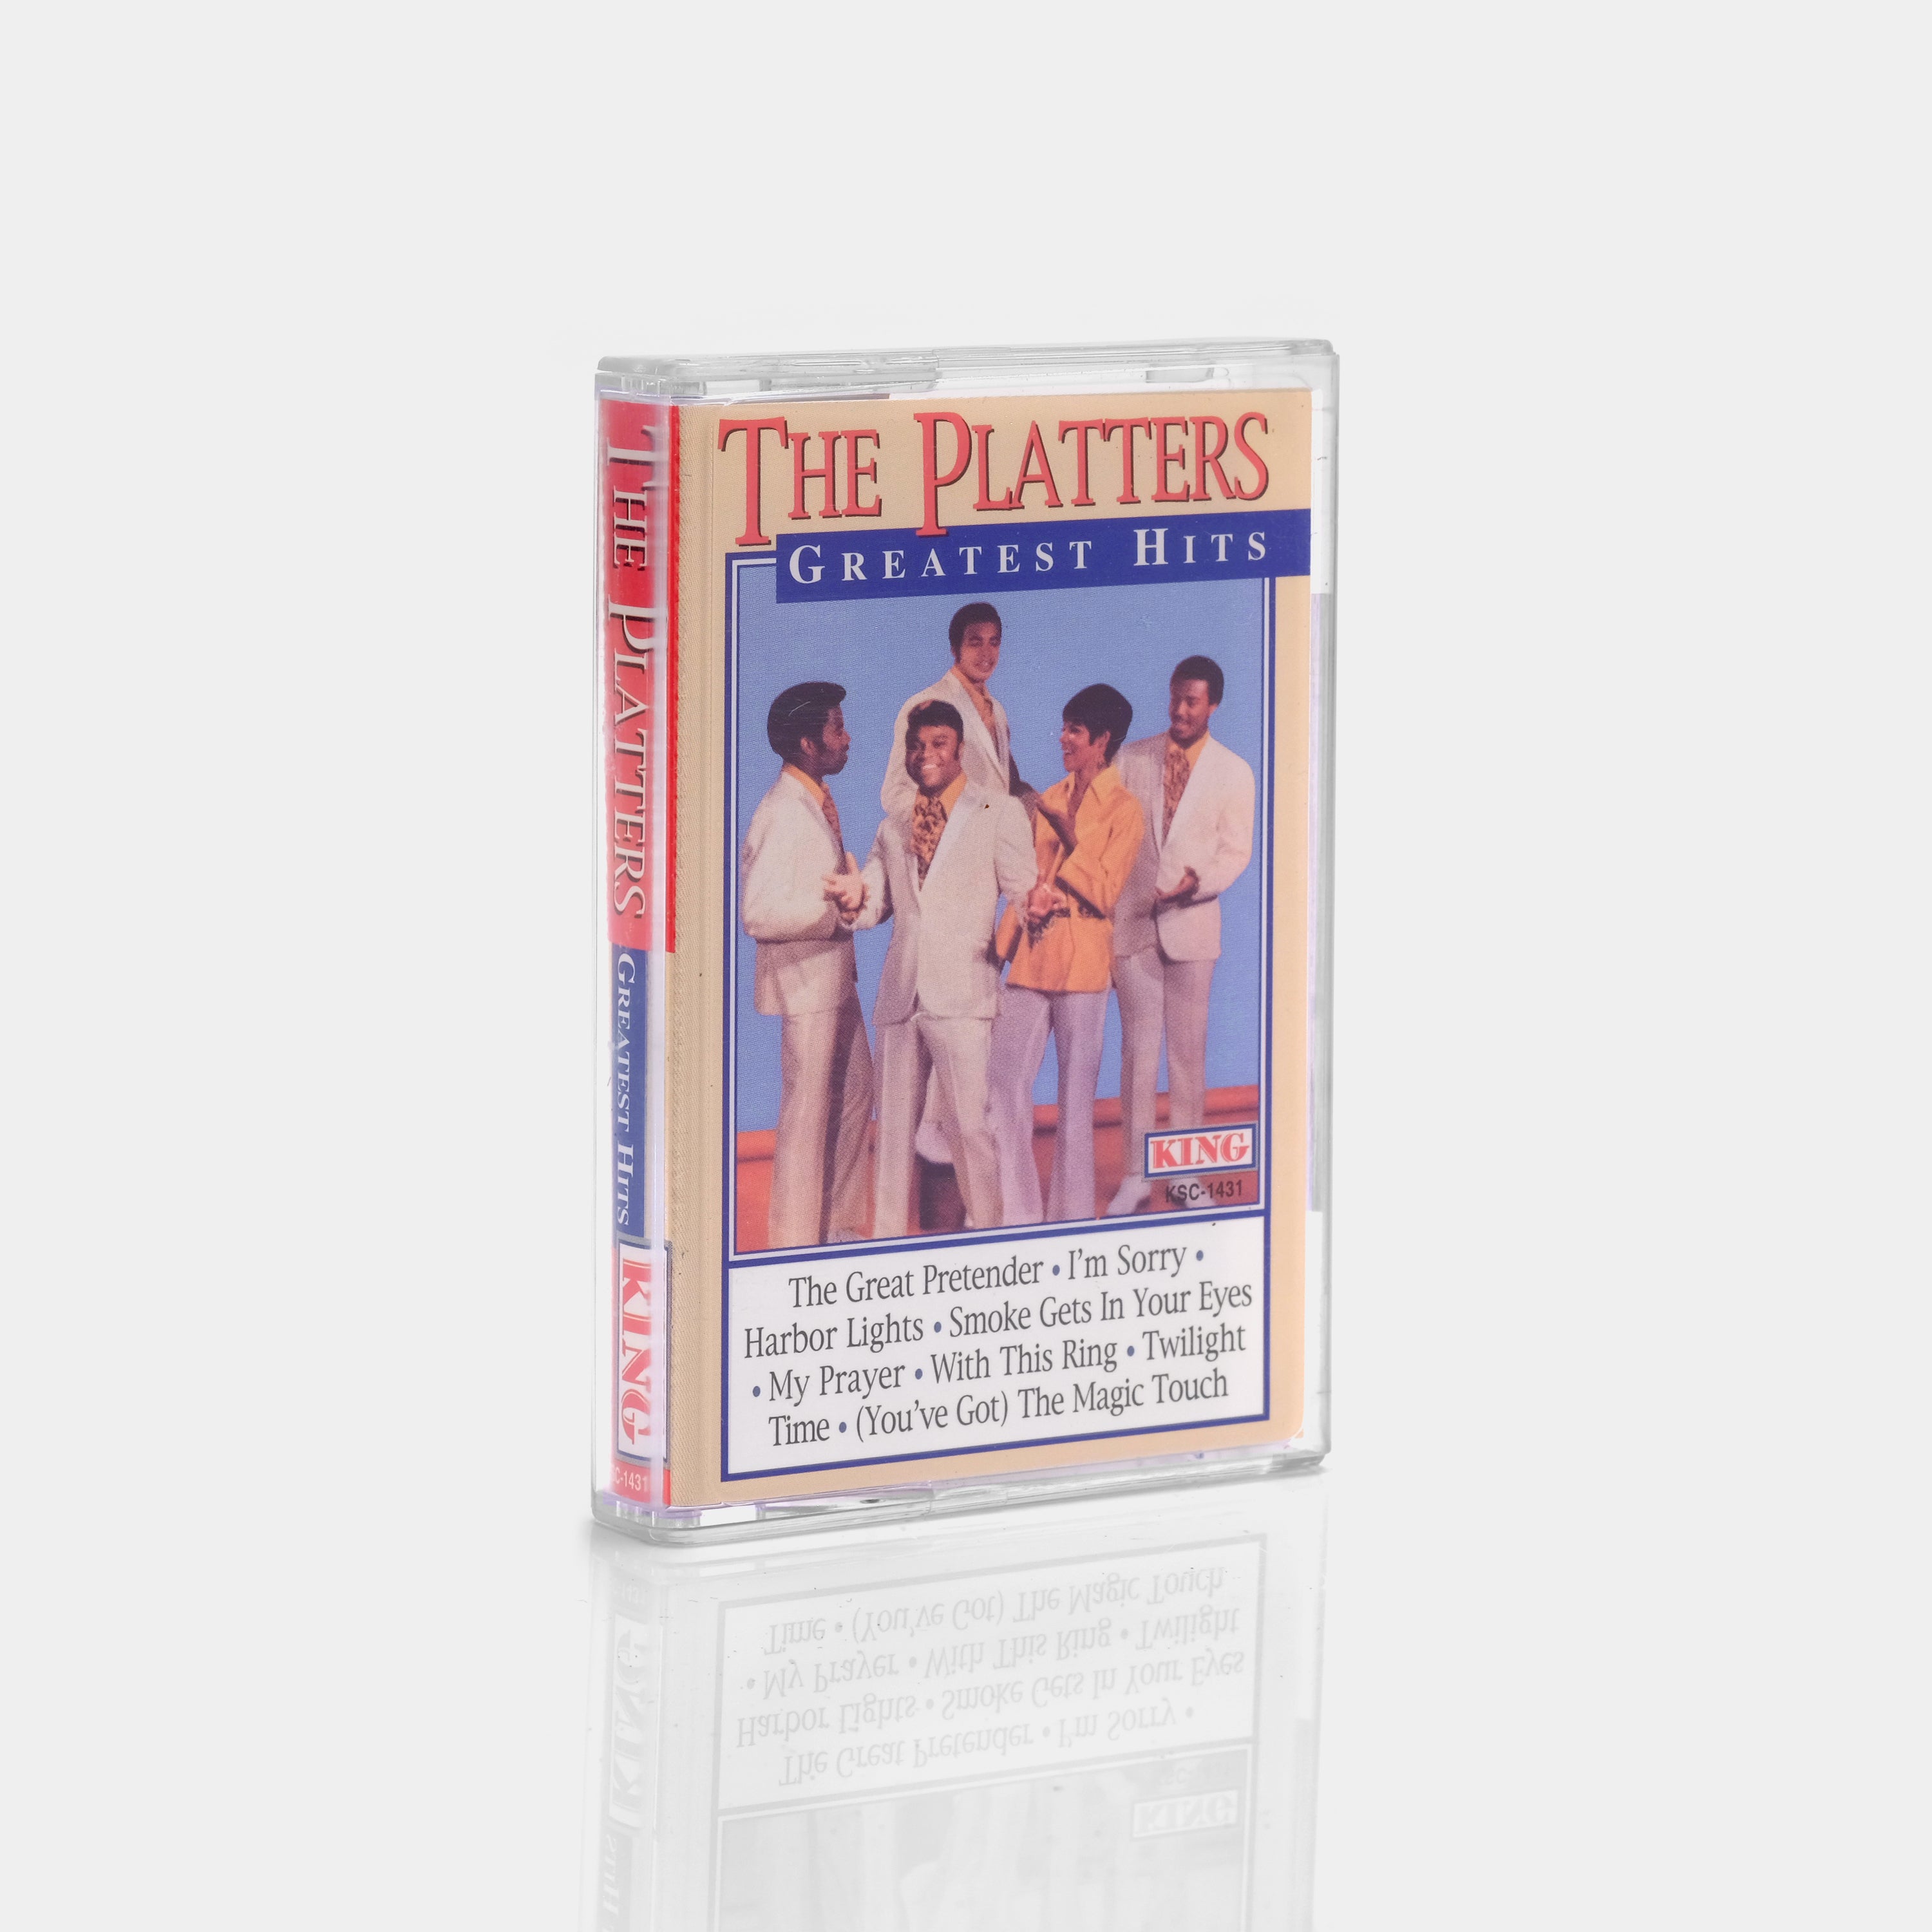 The Platters - Greatest Hits Cassette Tape